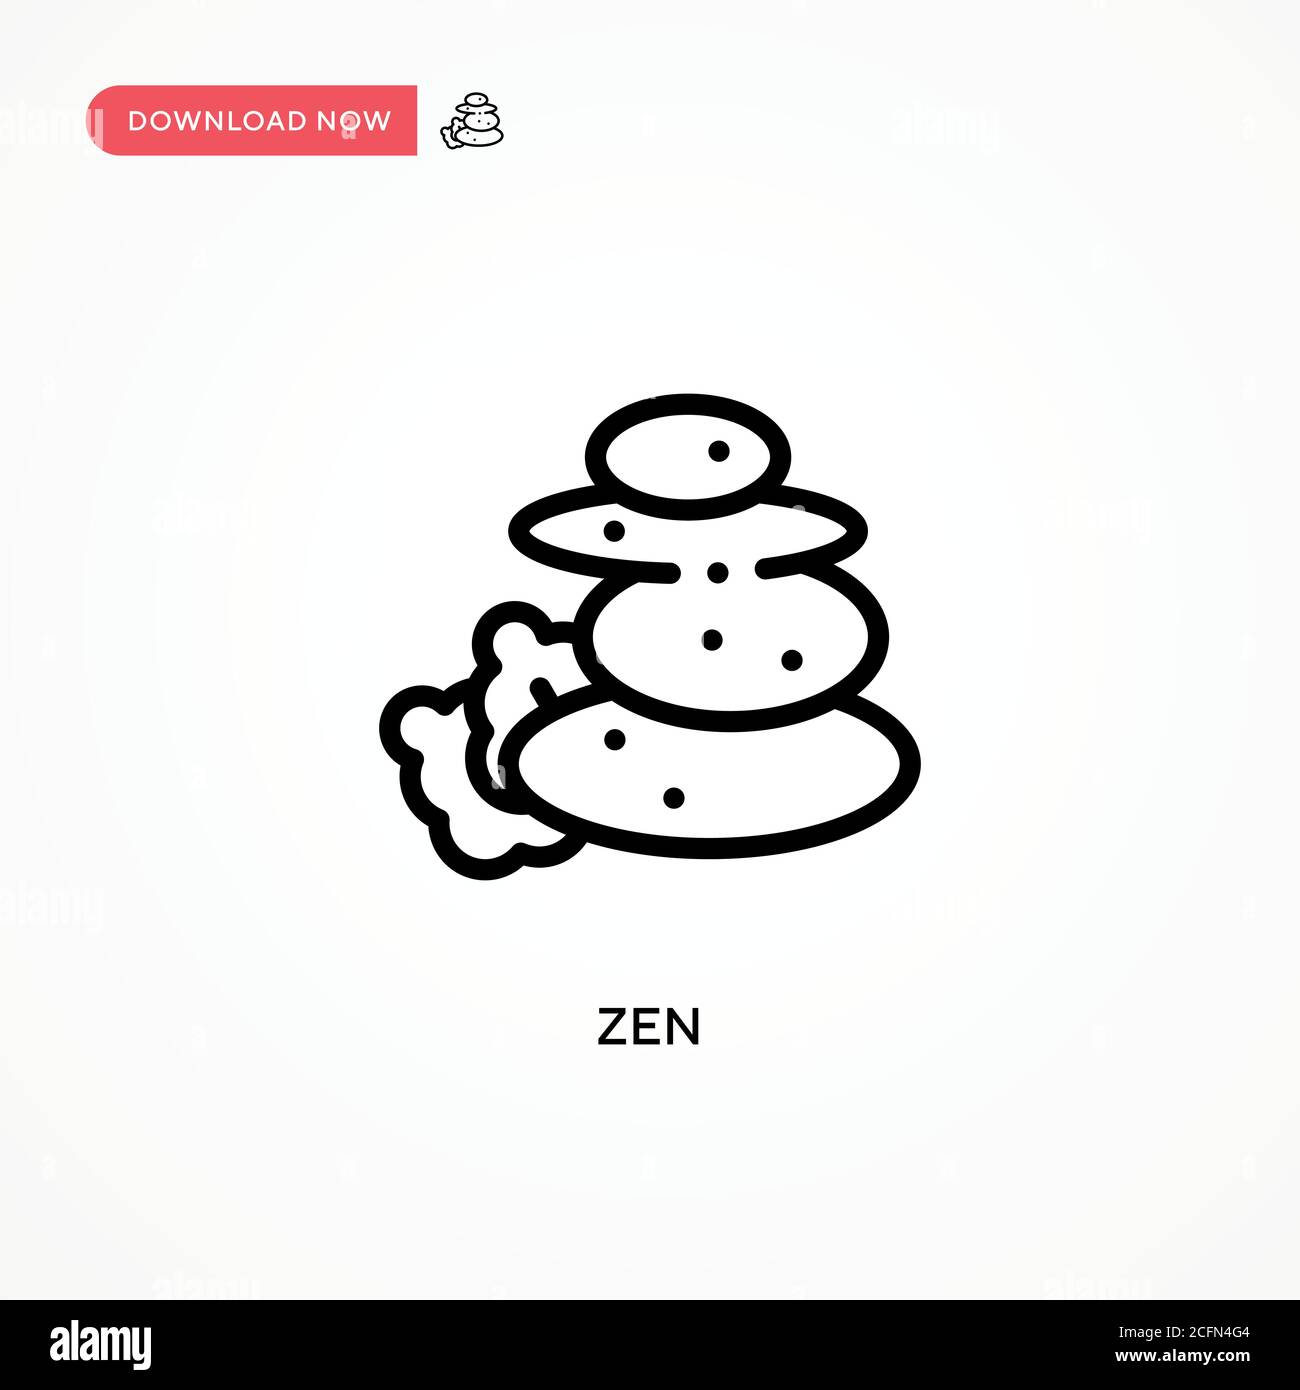 Zen vector icon. Modern, simple flat vector illustration for web site or mobile app Stock Vector